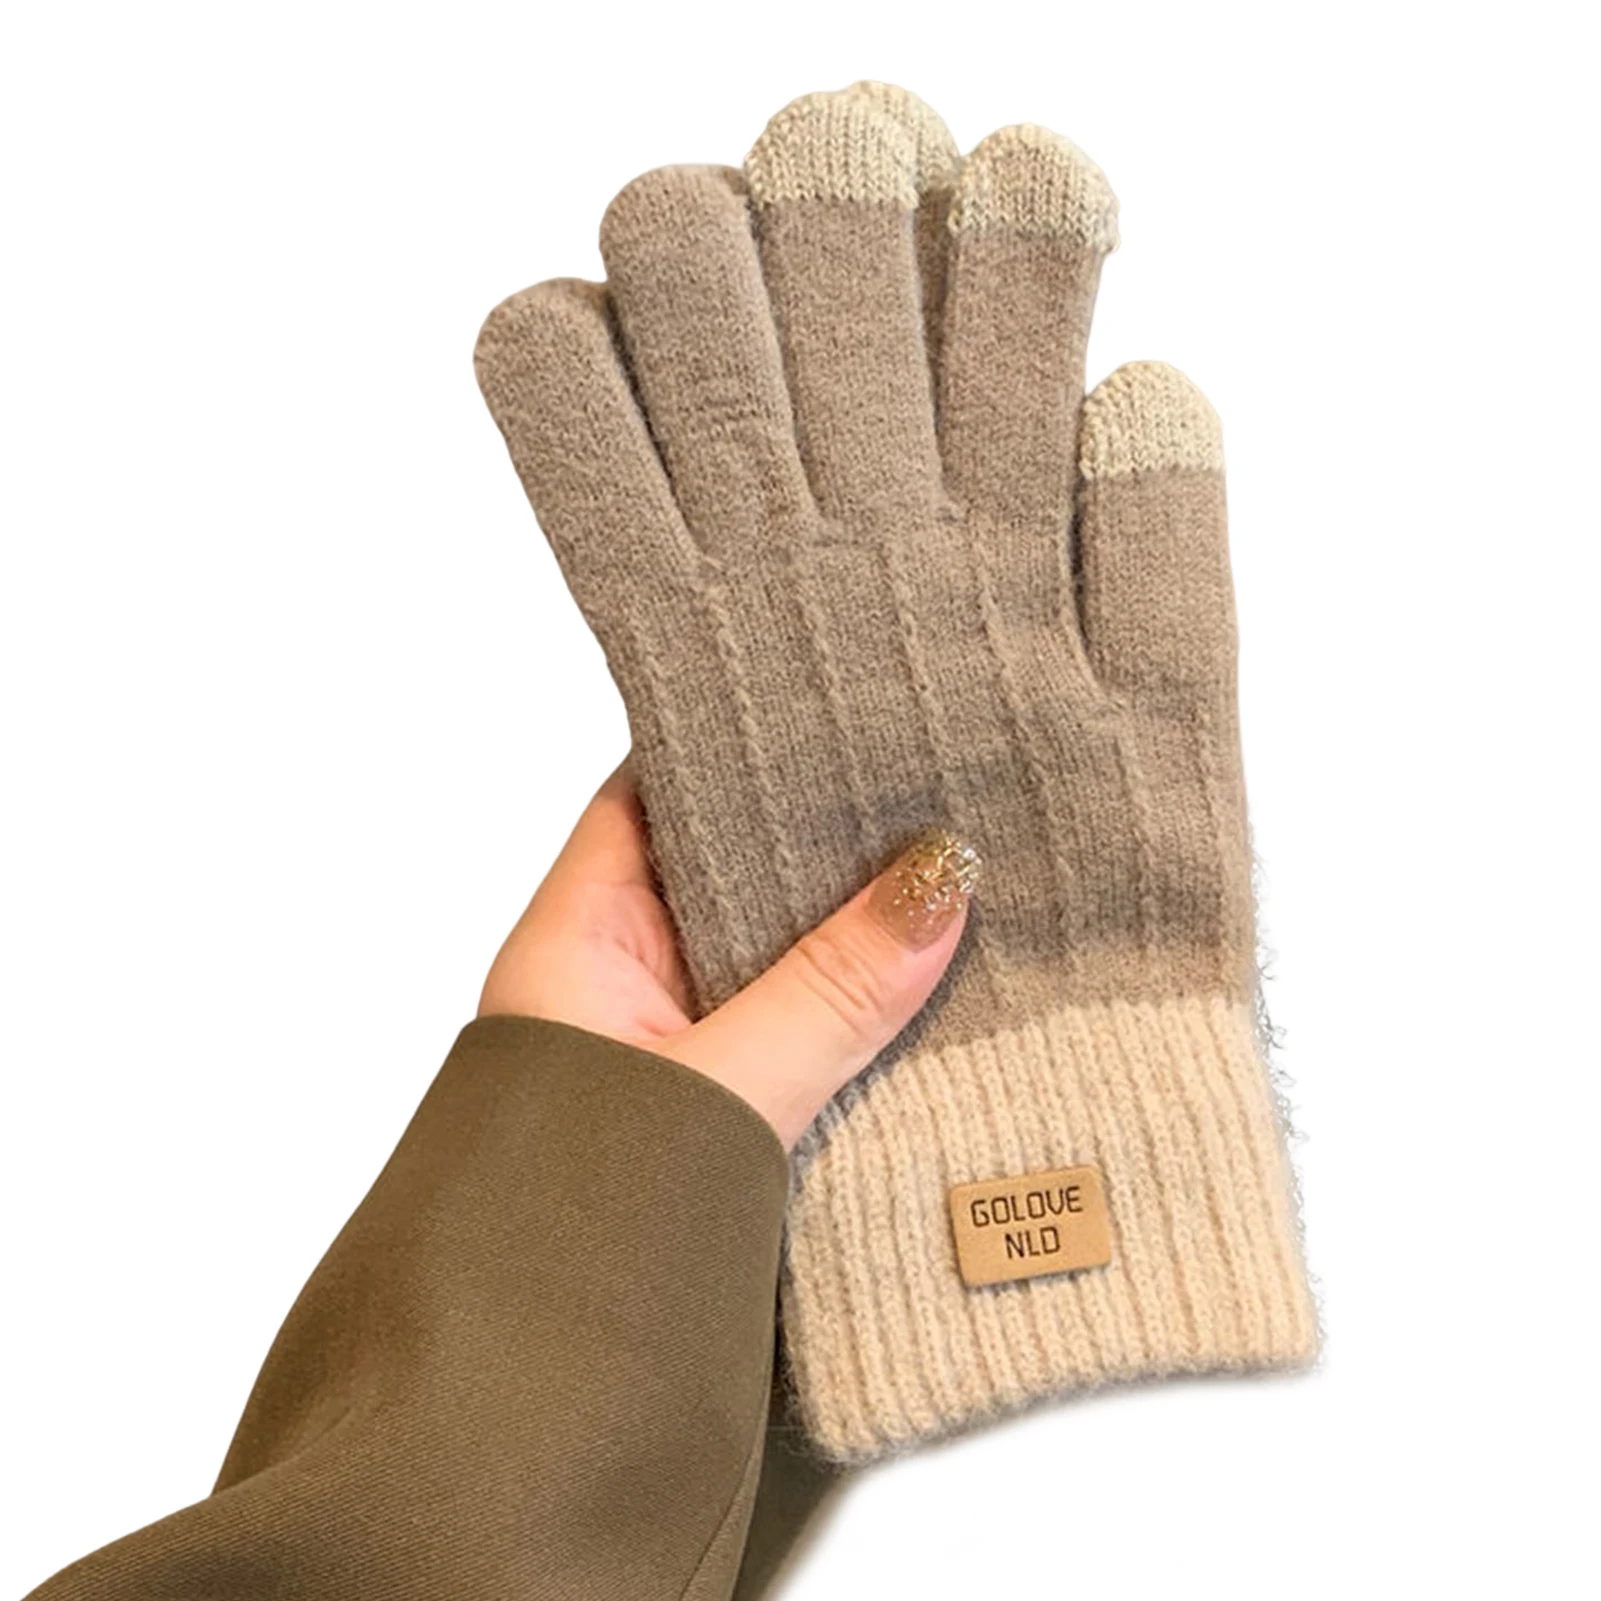 

Unisex Cable Knit Winter Gloves Windproof Solid Color with Touchscreen Texting Gloves for Cold Weather Protect Hands